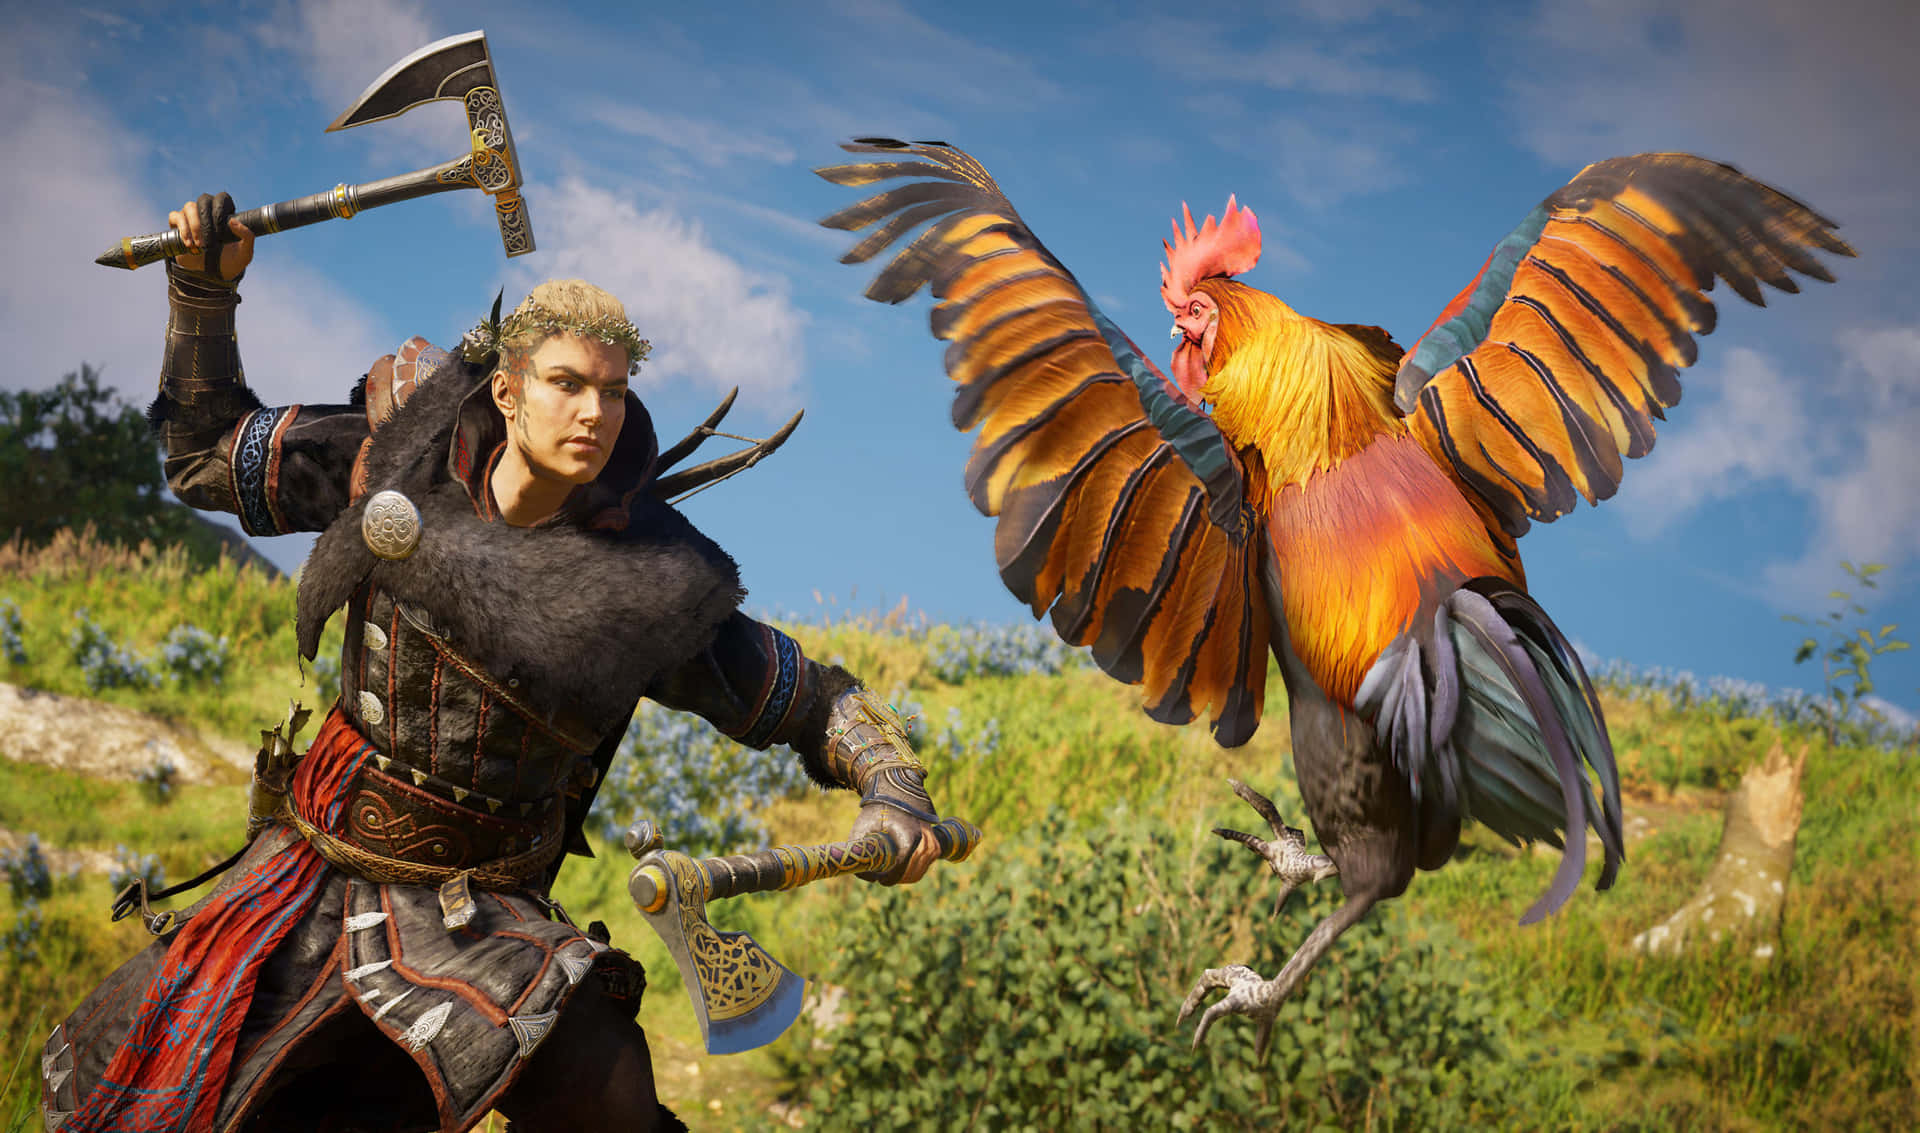 A Man With A Sword And A Rooster In The Background